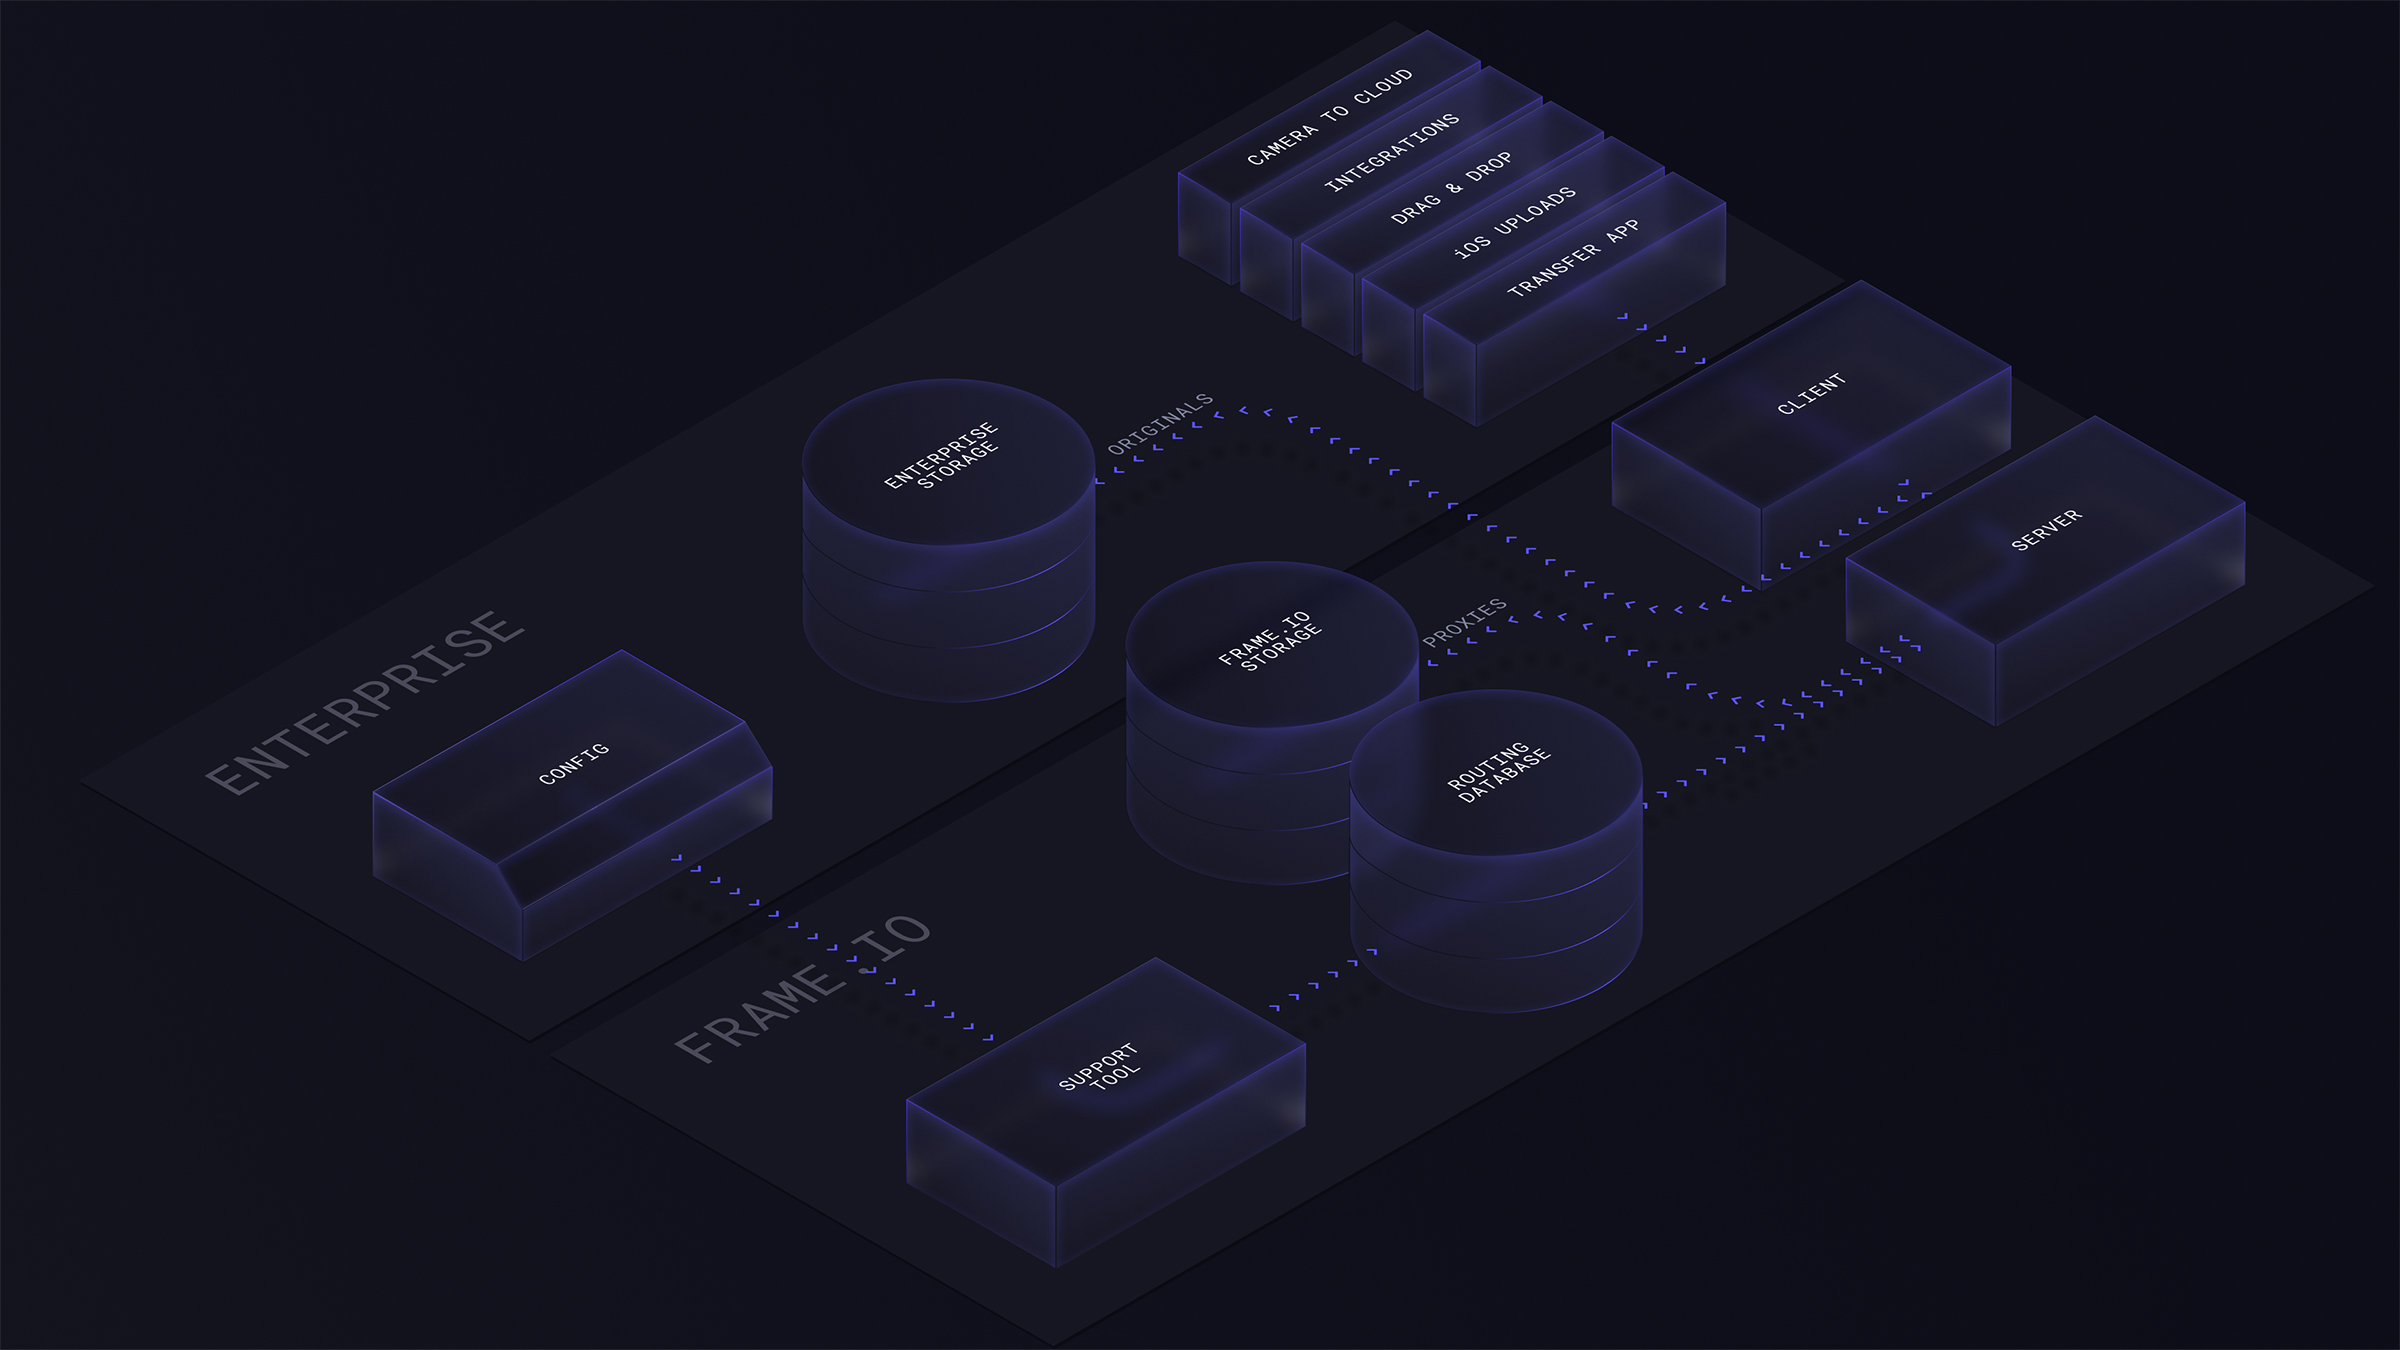 Introducing Frame.io Storage Connect